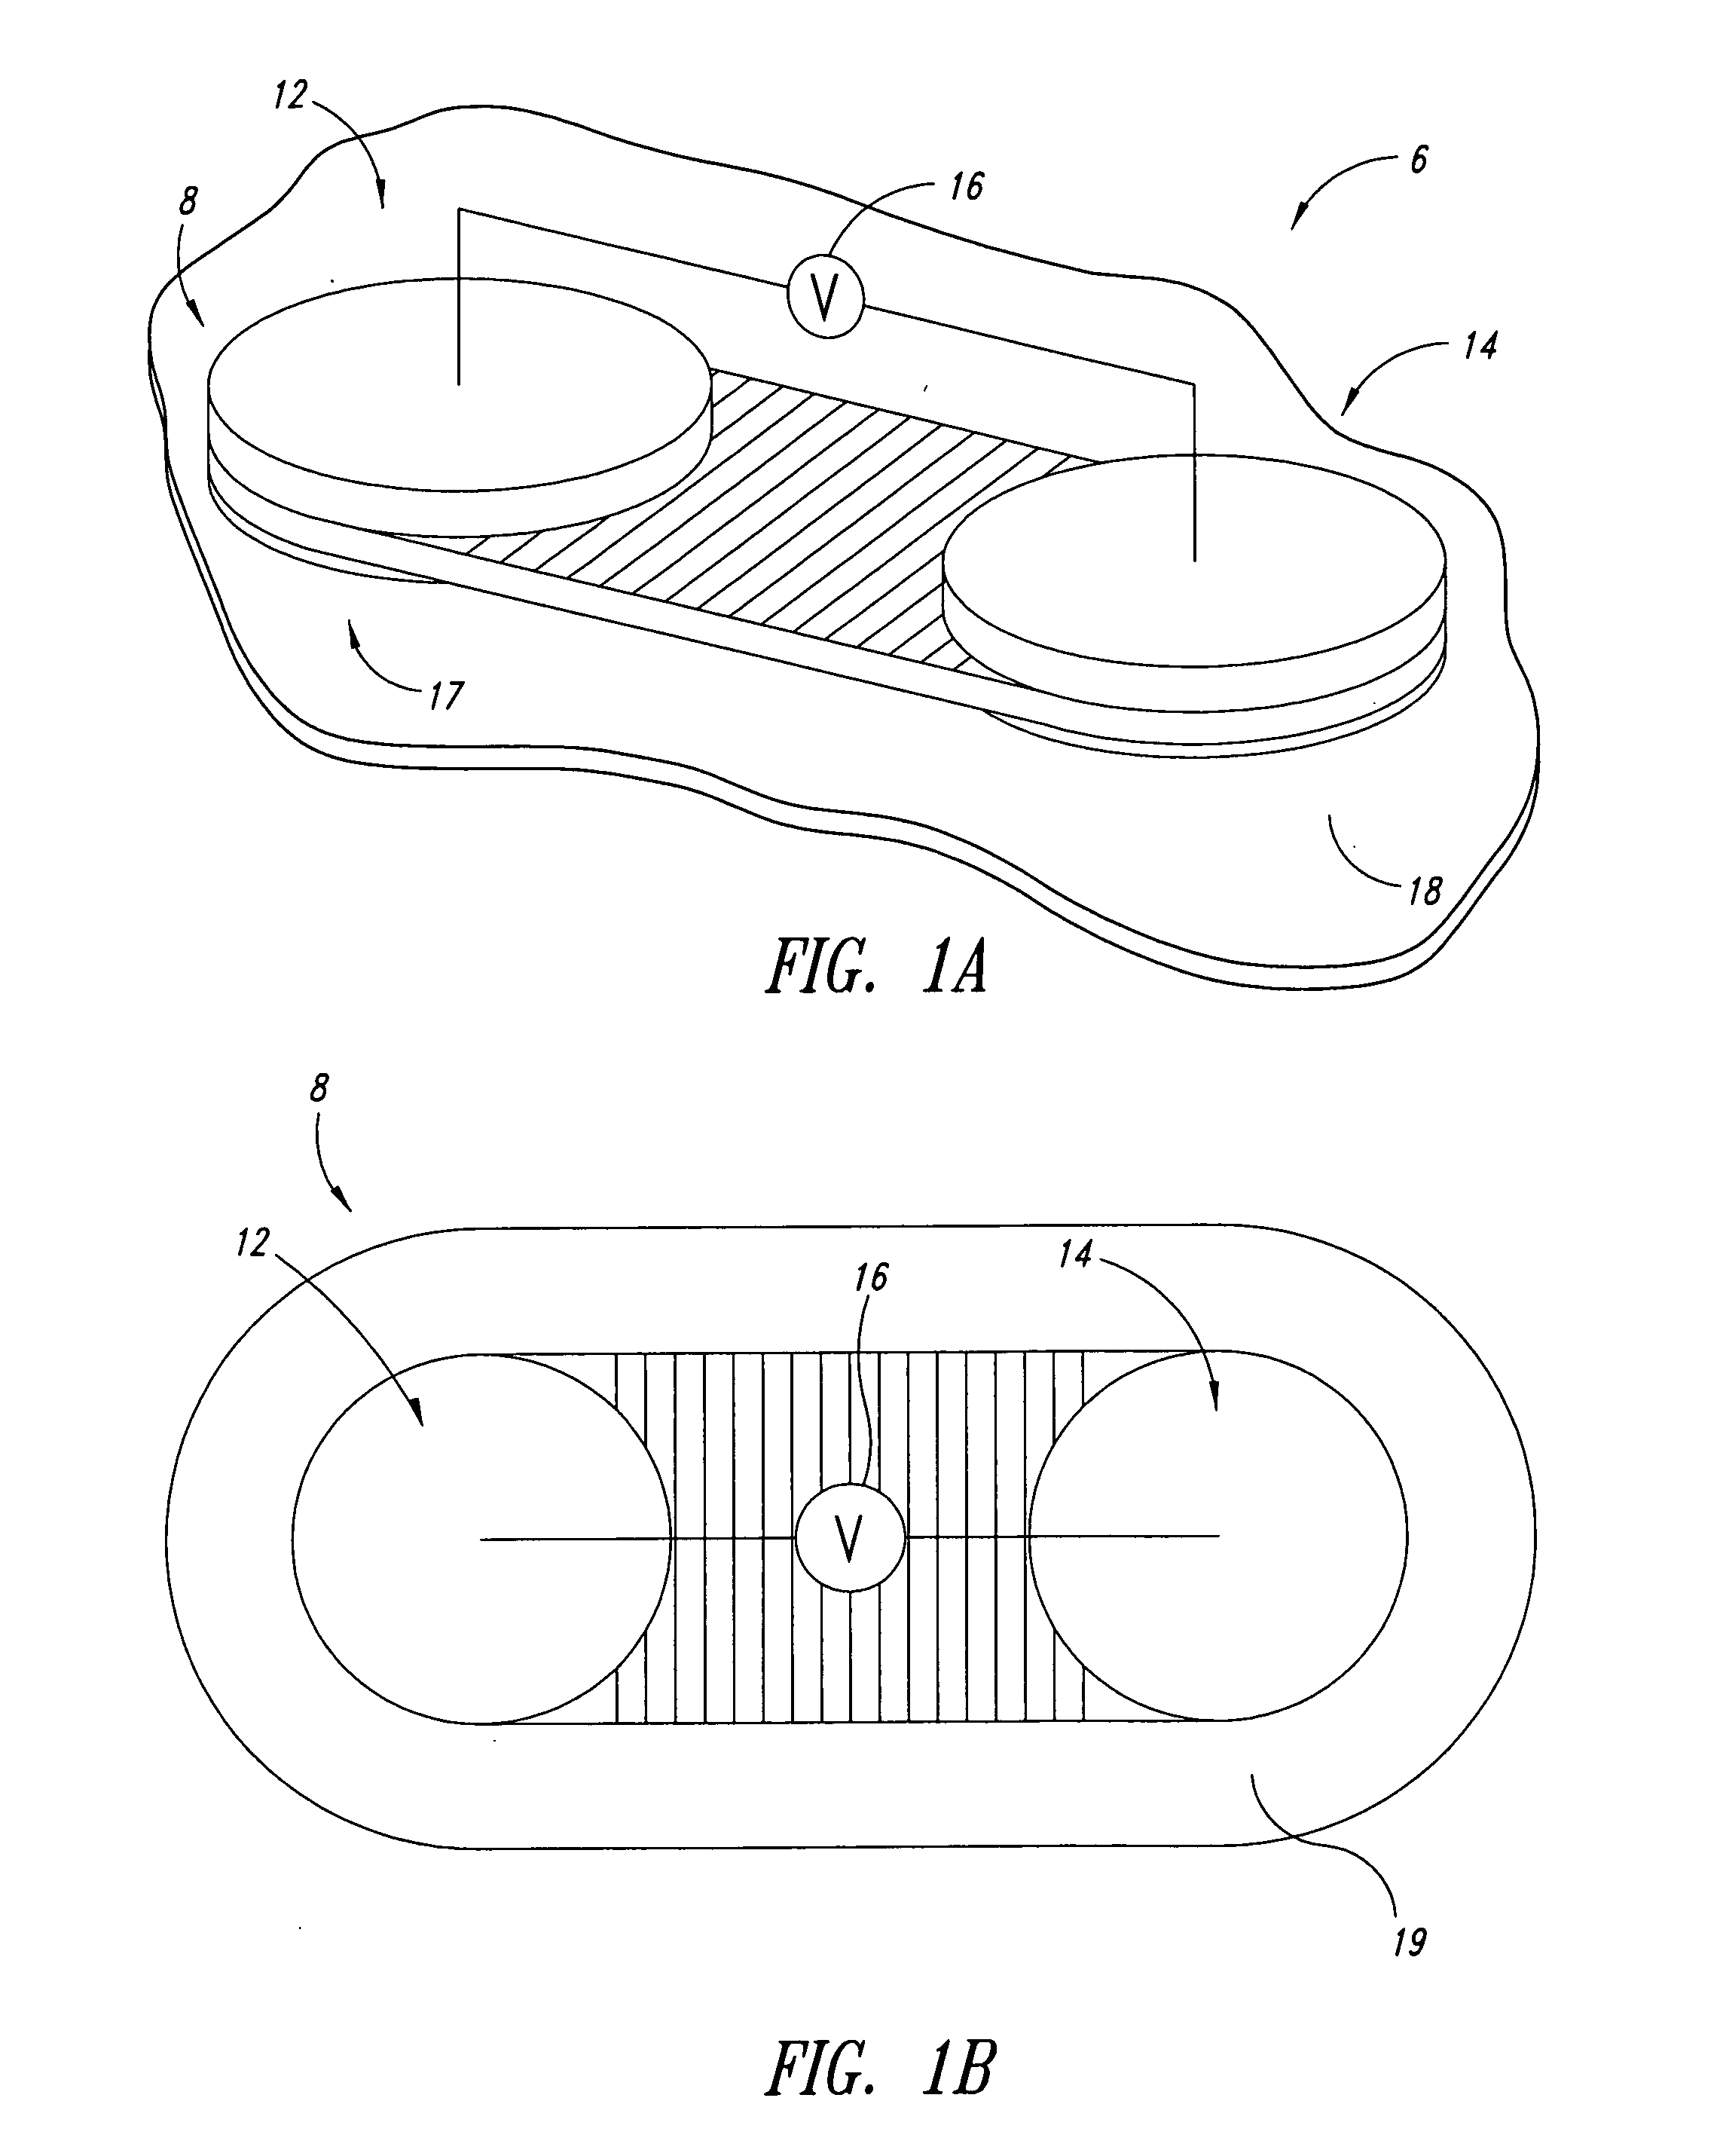 Iontophoresis apparatus and method to deliver antibiotics to biological interfaces